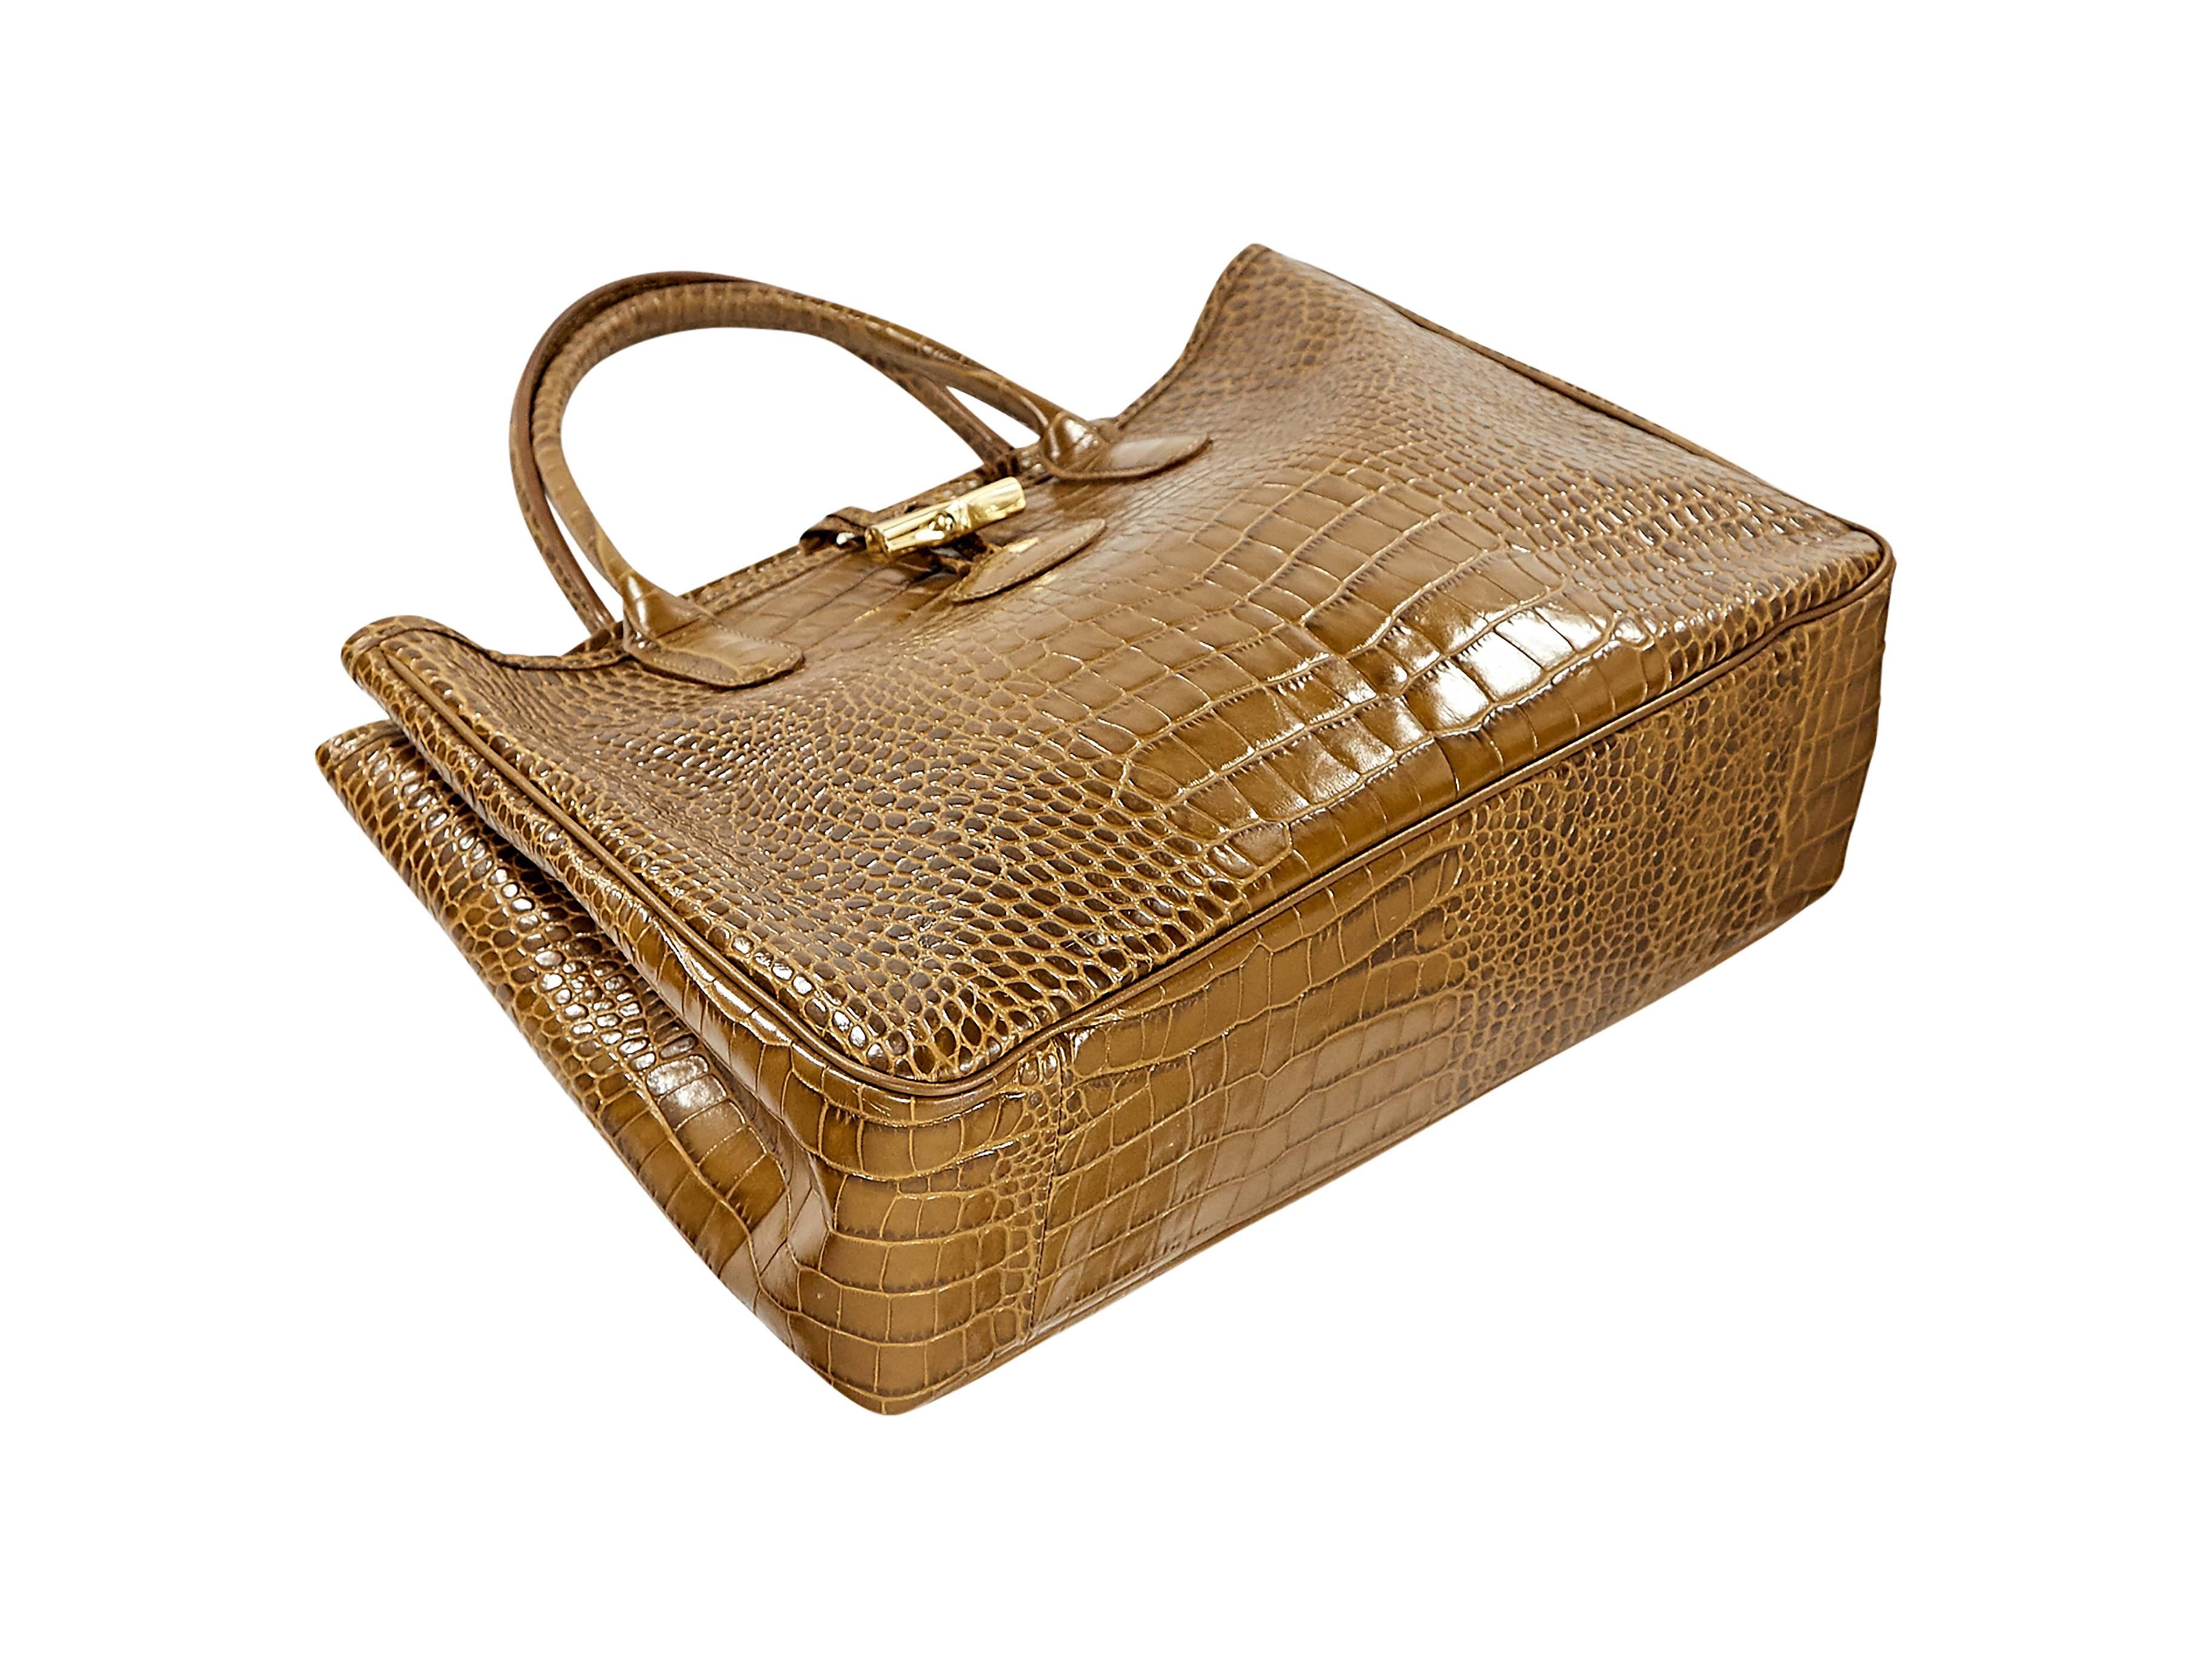 Olive crocodile-embossed leather tote bag by Longchamp.  Top carry handles.  Top toggle closure.  Flat bottom. 